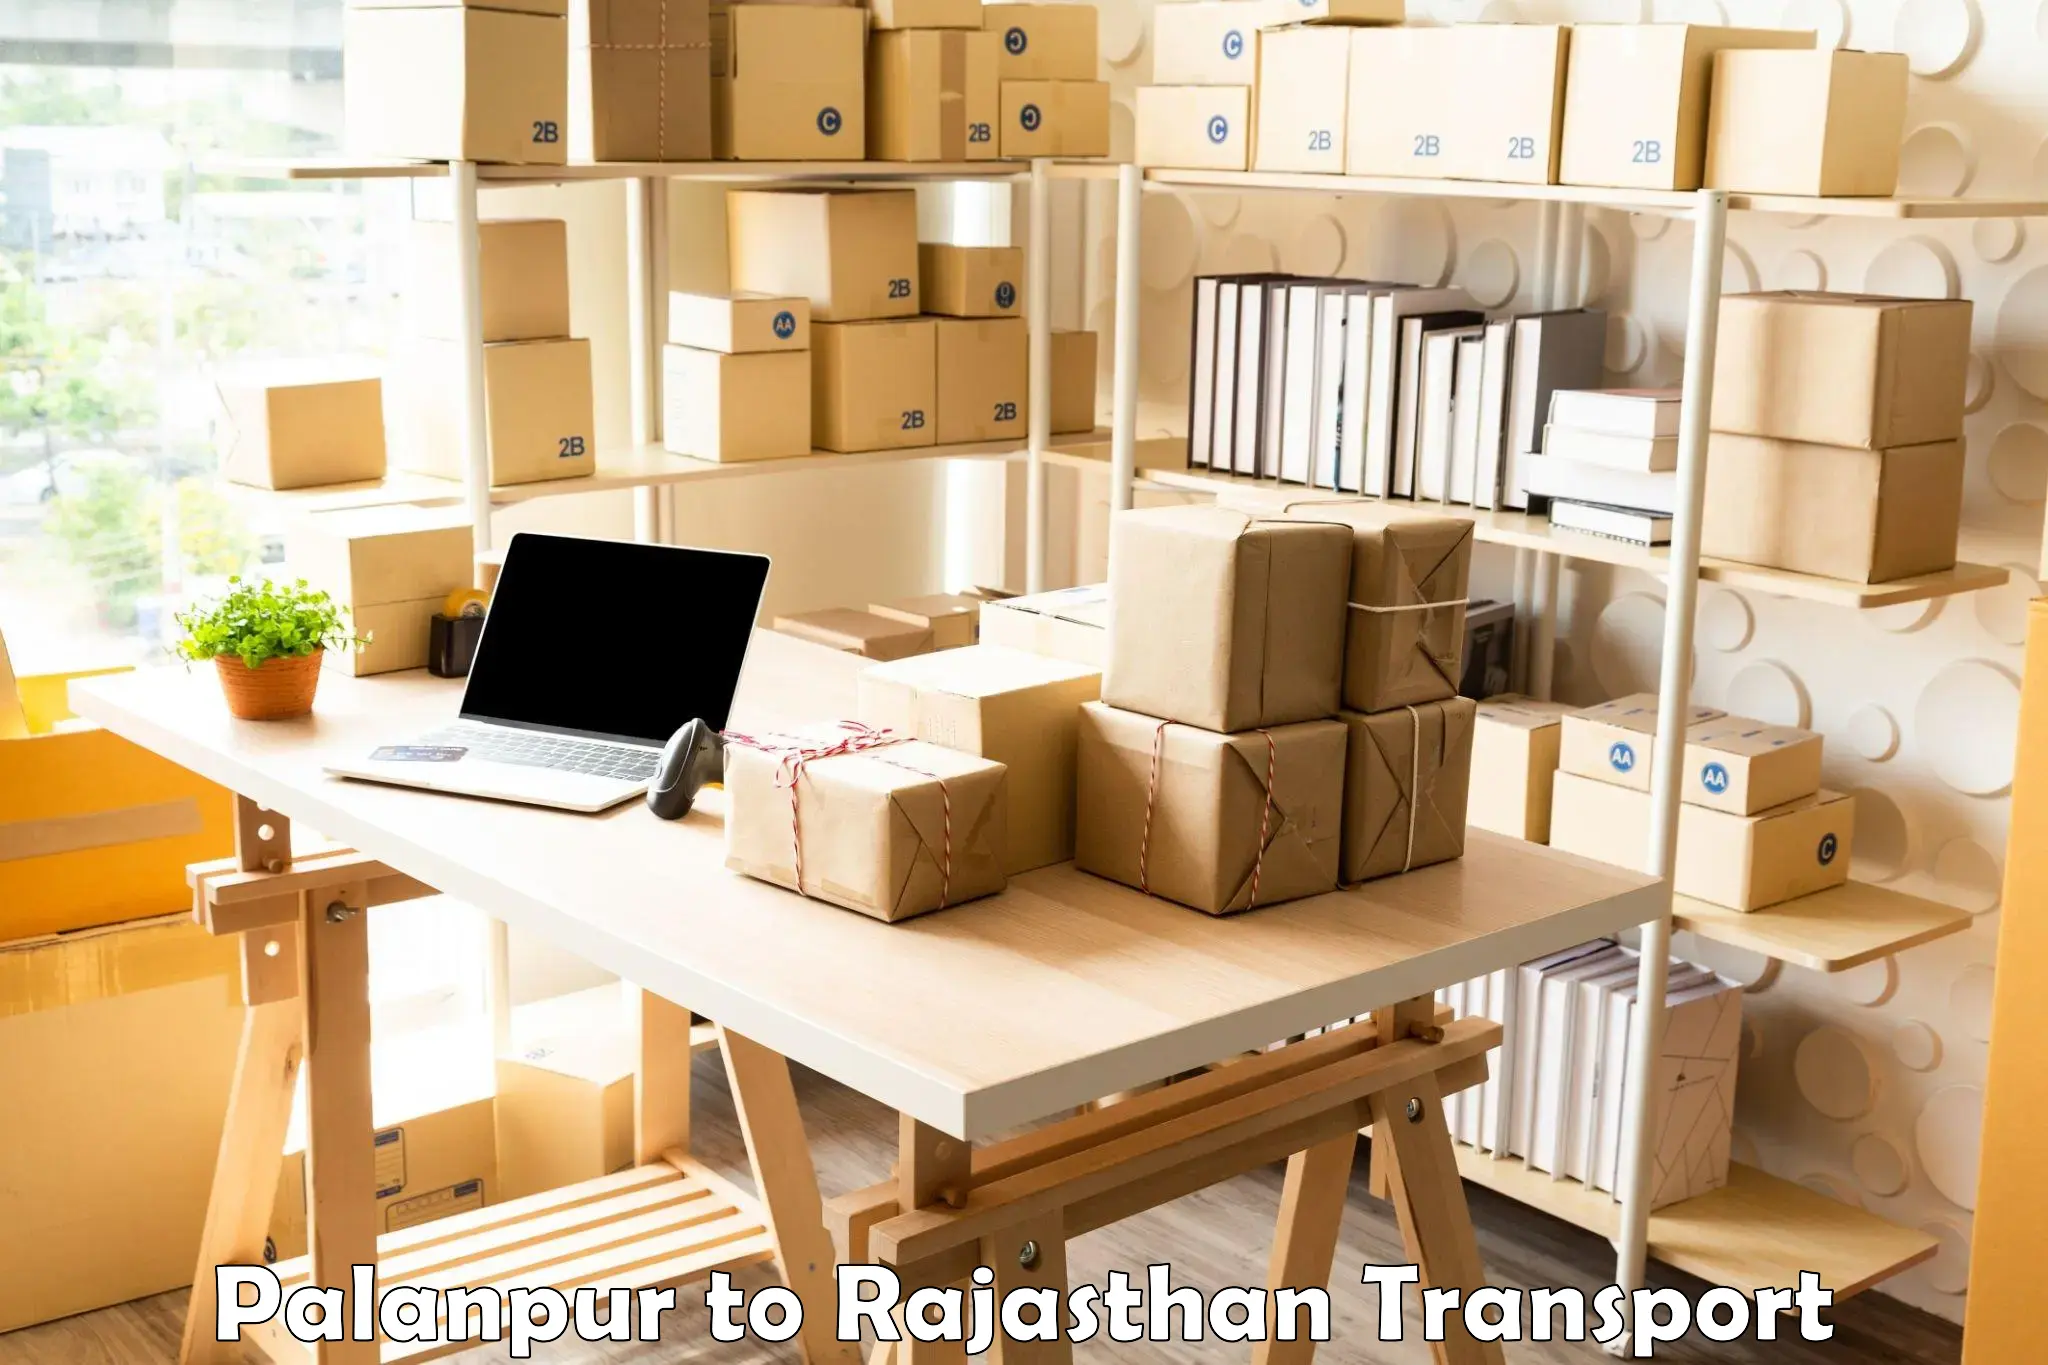 Truck transport companies in India Palanpur to Mathania